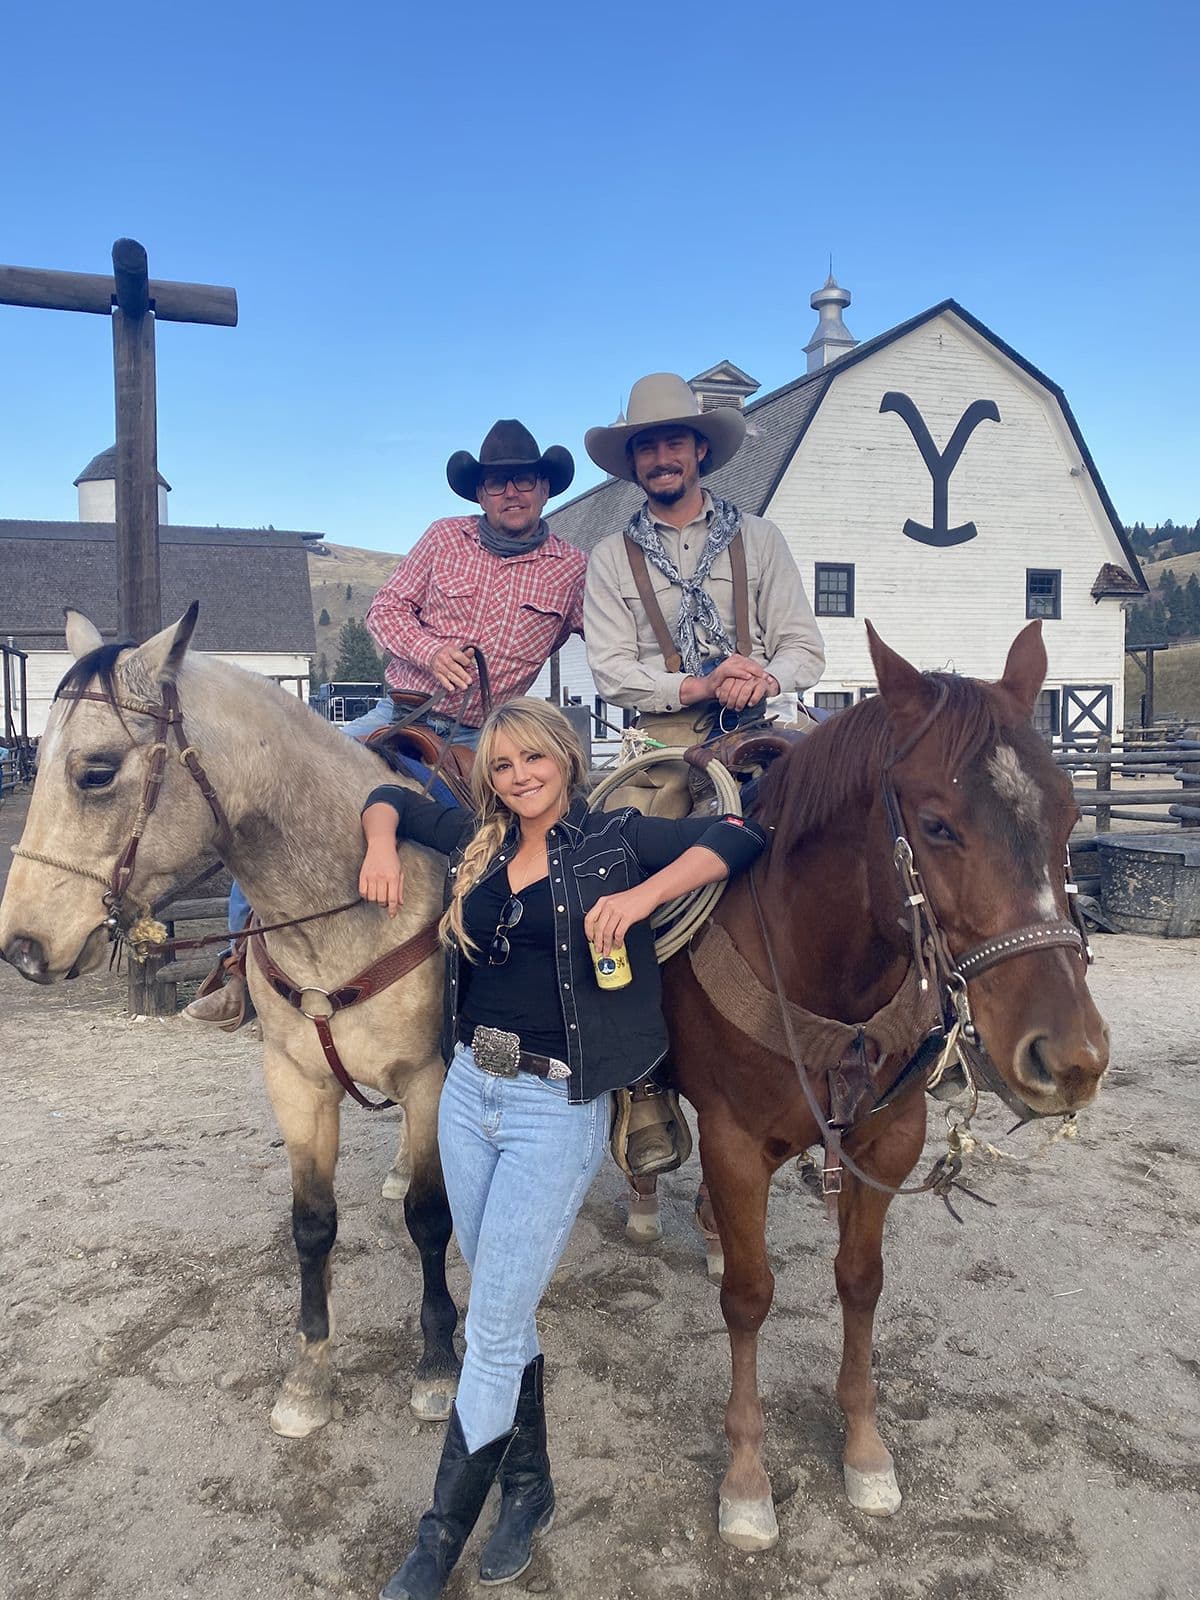 Yellowstone Stars Hassie Harrison and Ryan Bingham Tie the Knot in Cowboy Black-Tie Ceremony